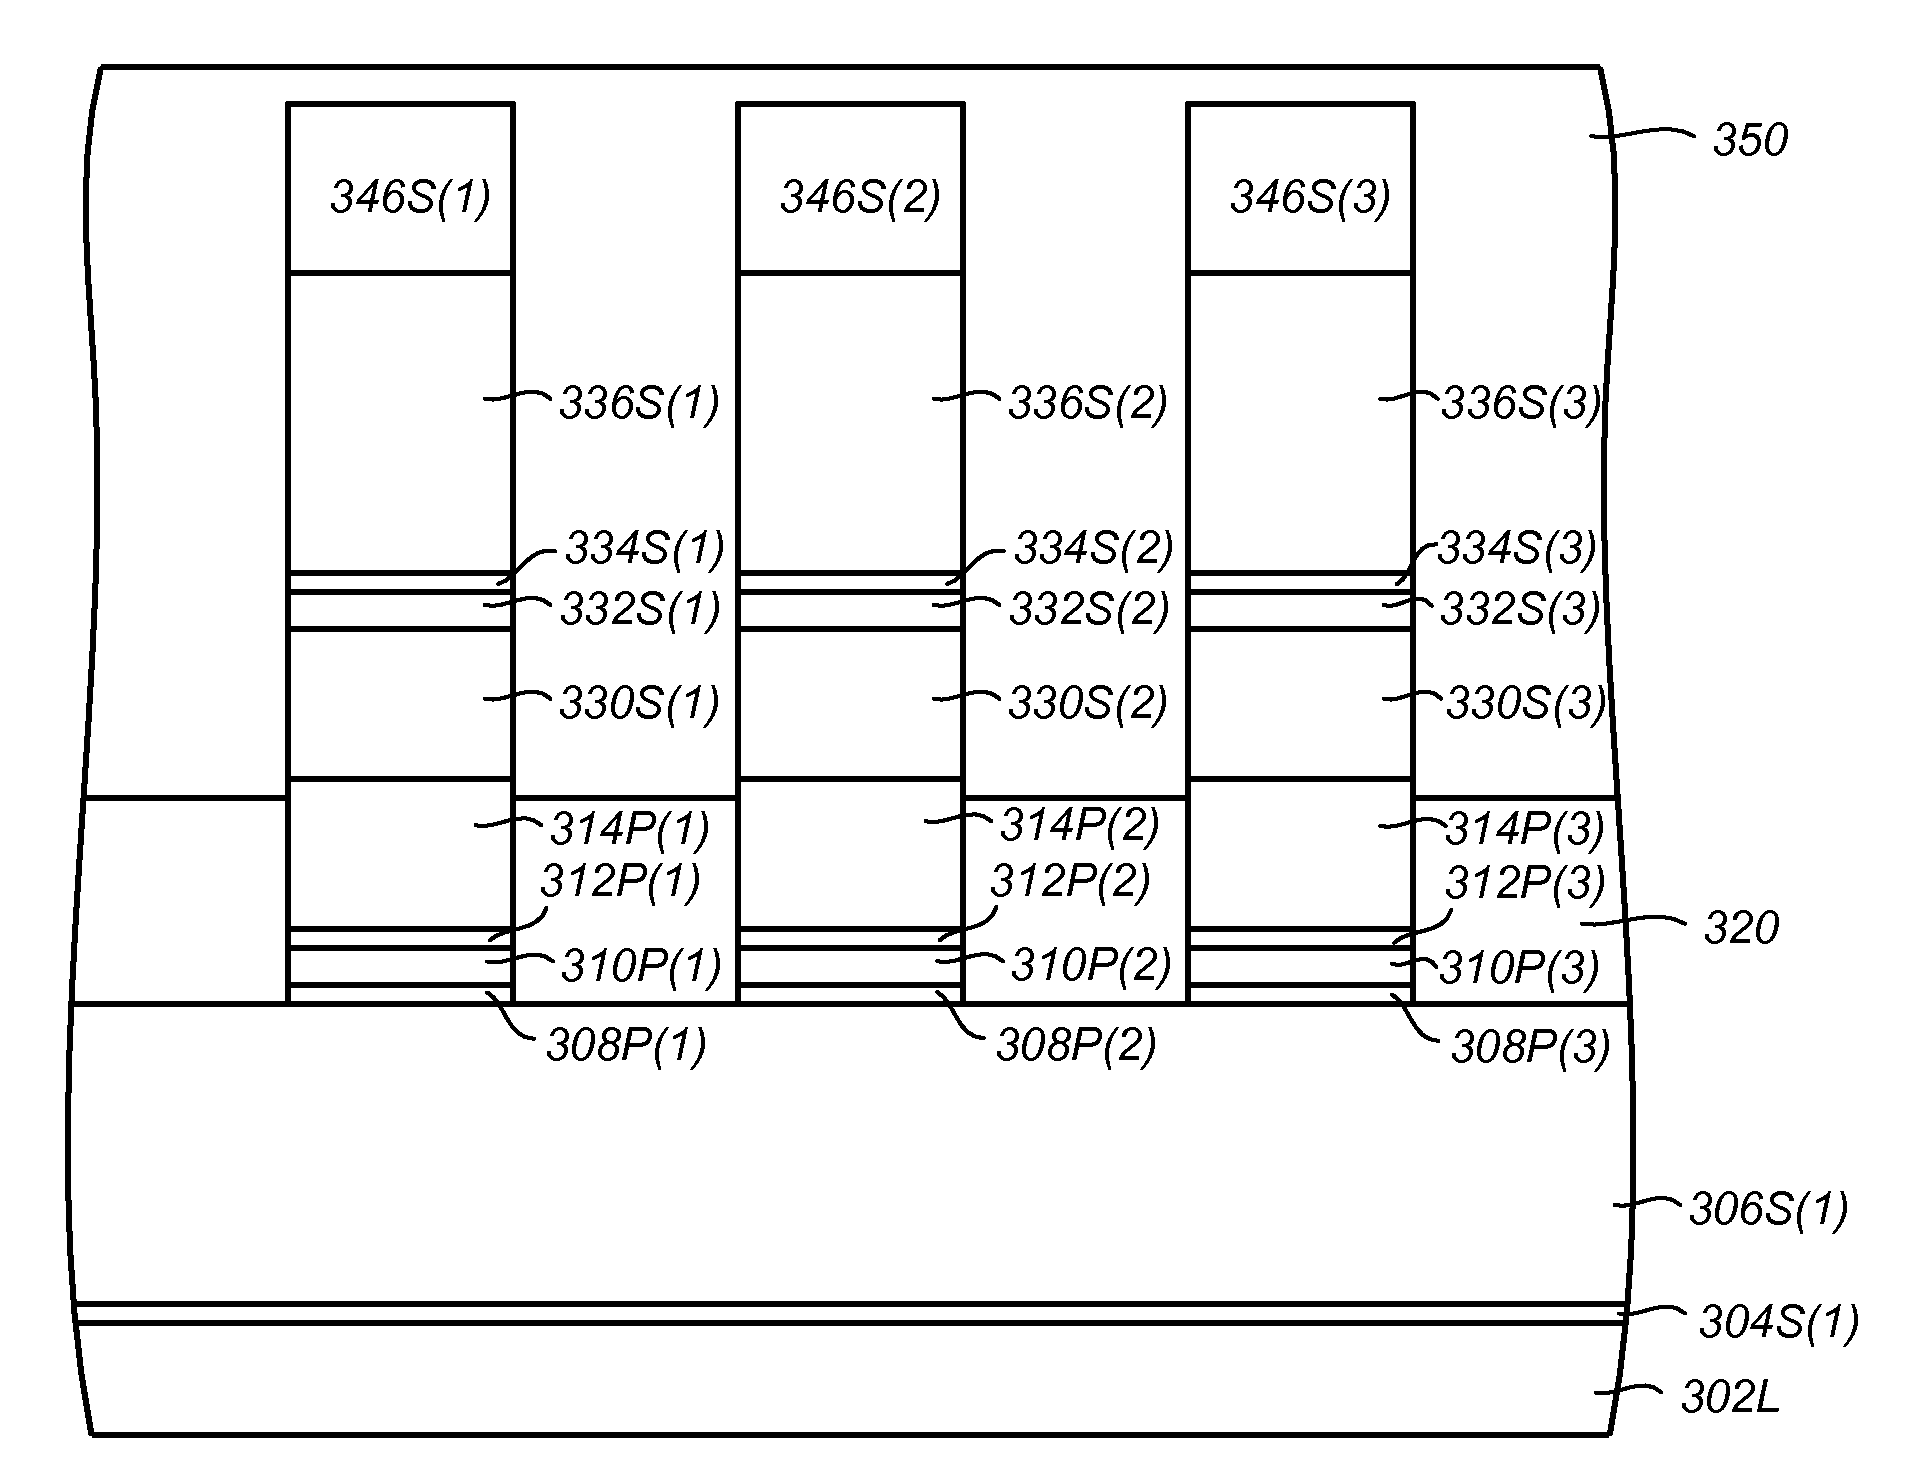 Non-Volatile Memory Arrays Comprising Rail Stacks with a Shared Diode Component Portion for Diodes of Electrically Isolated Pillars